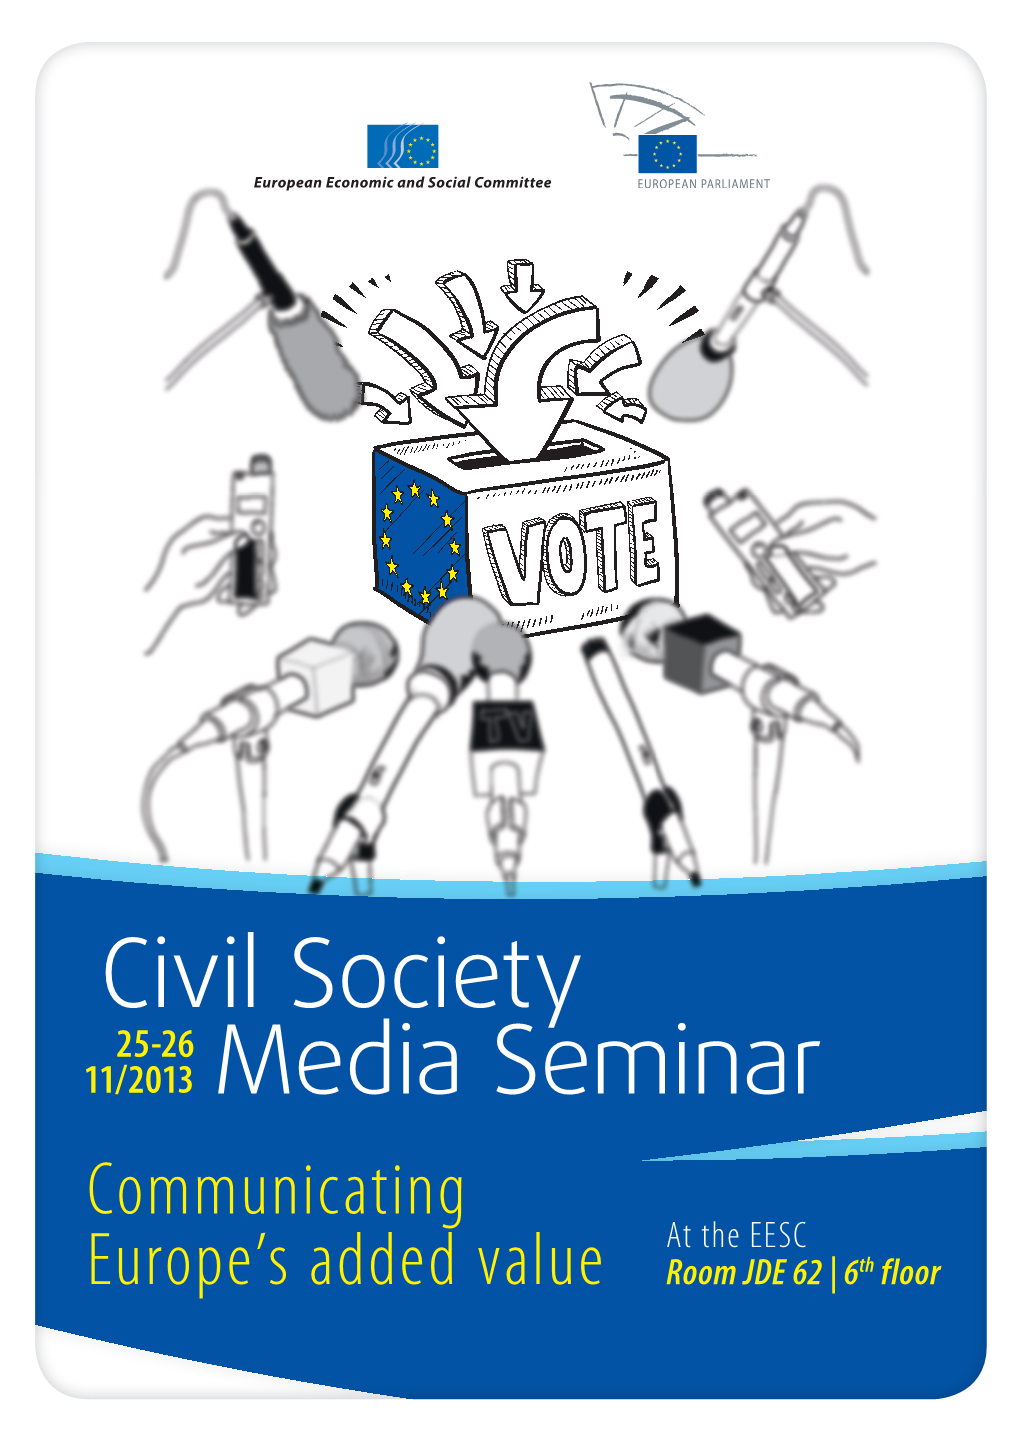 Civil Society Media Seminar, We in the EESC Want to Learn More About What You See Are the Problems We Face and How You Think We Can Overcome Them